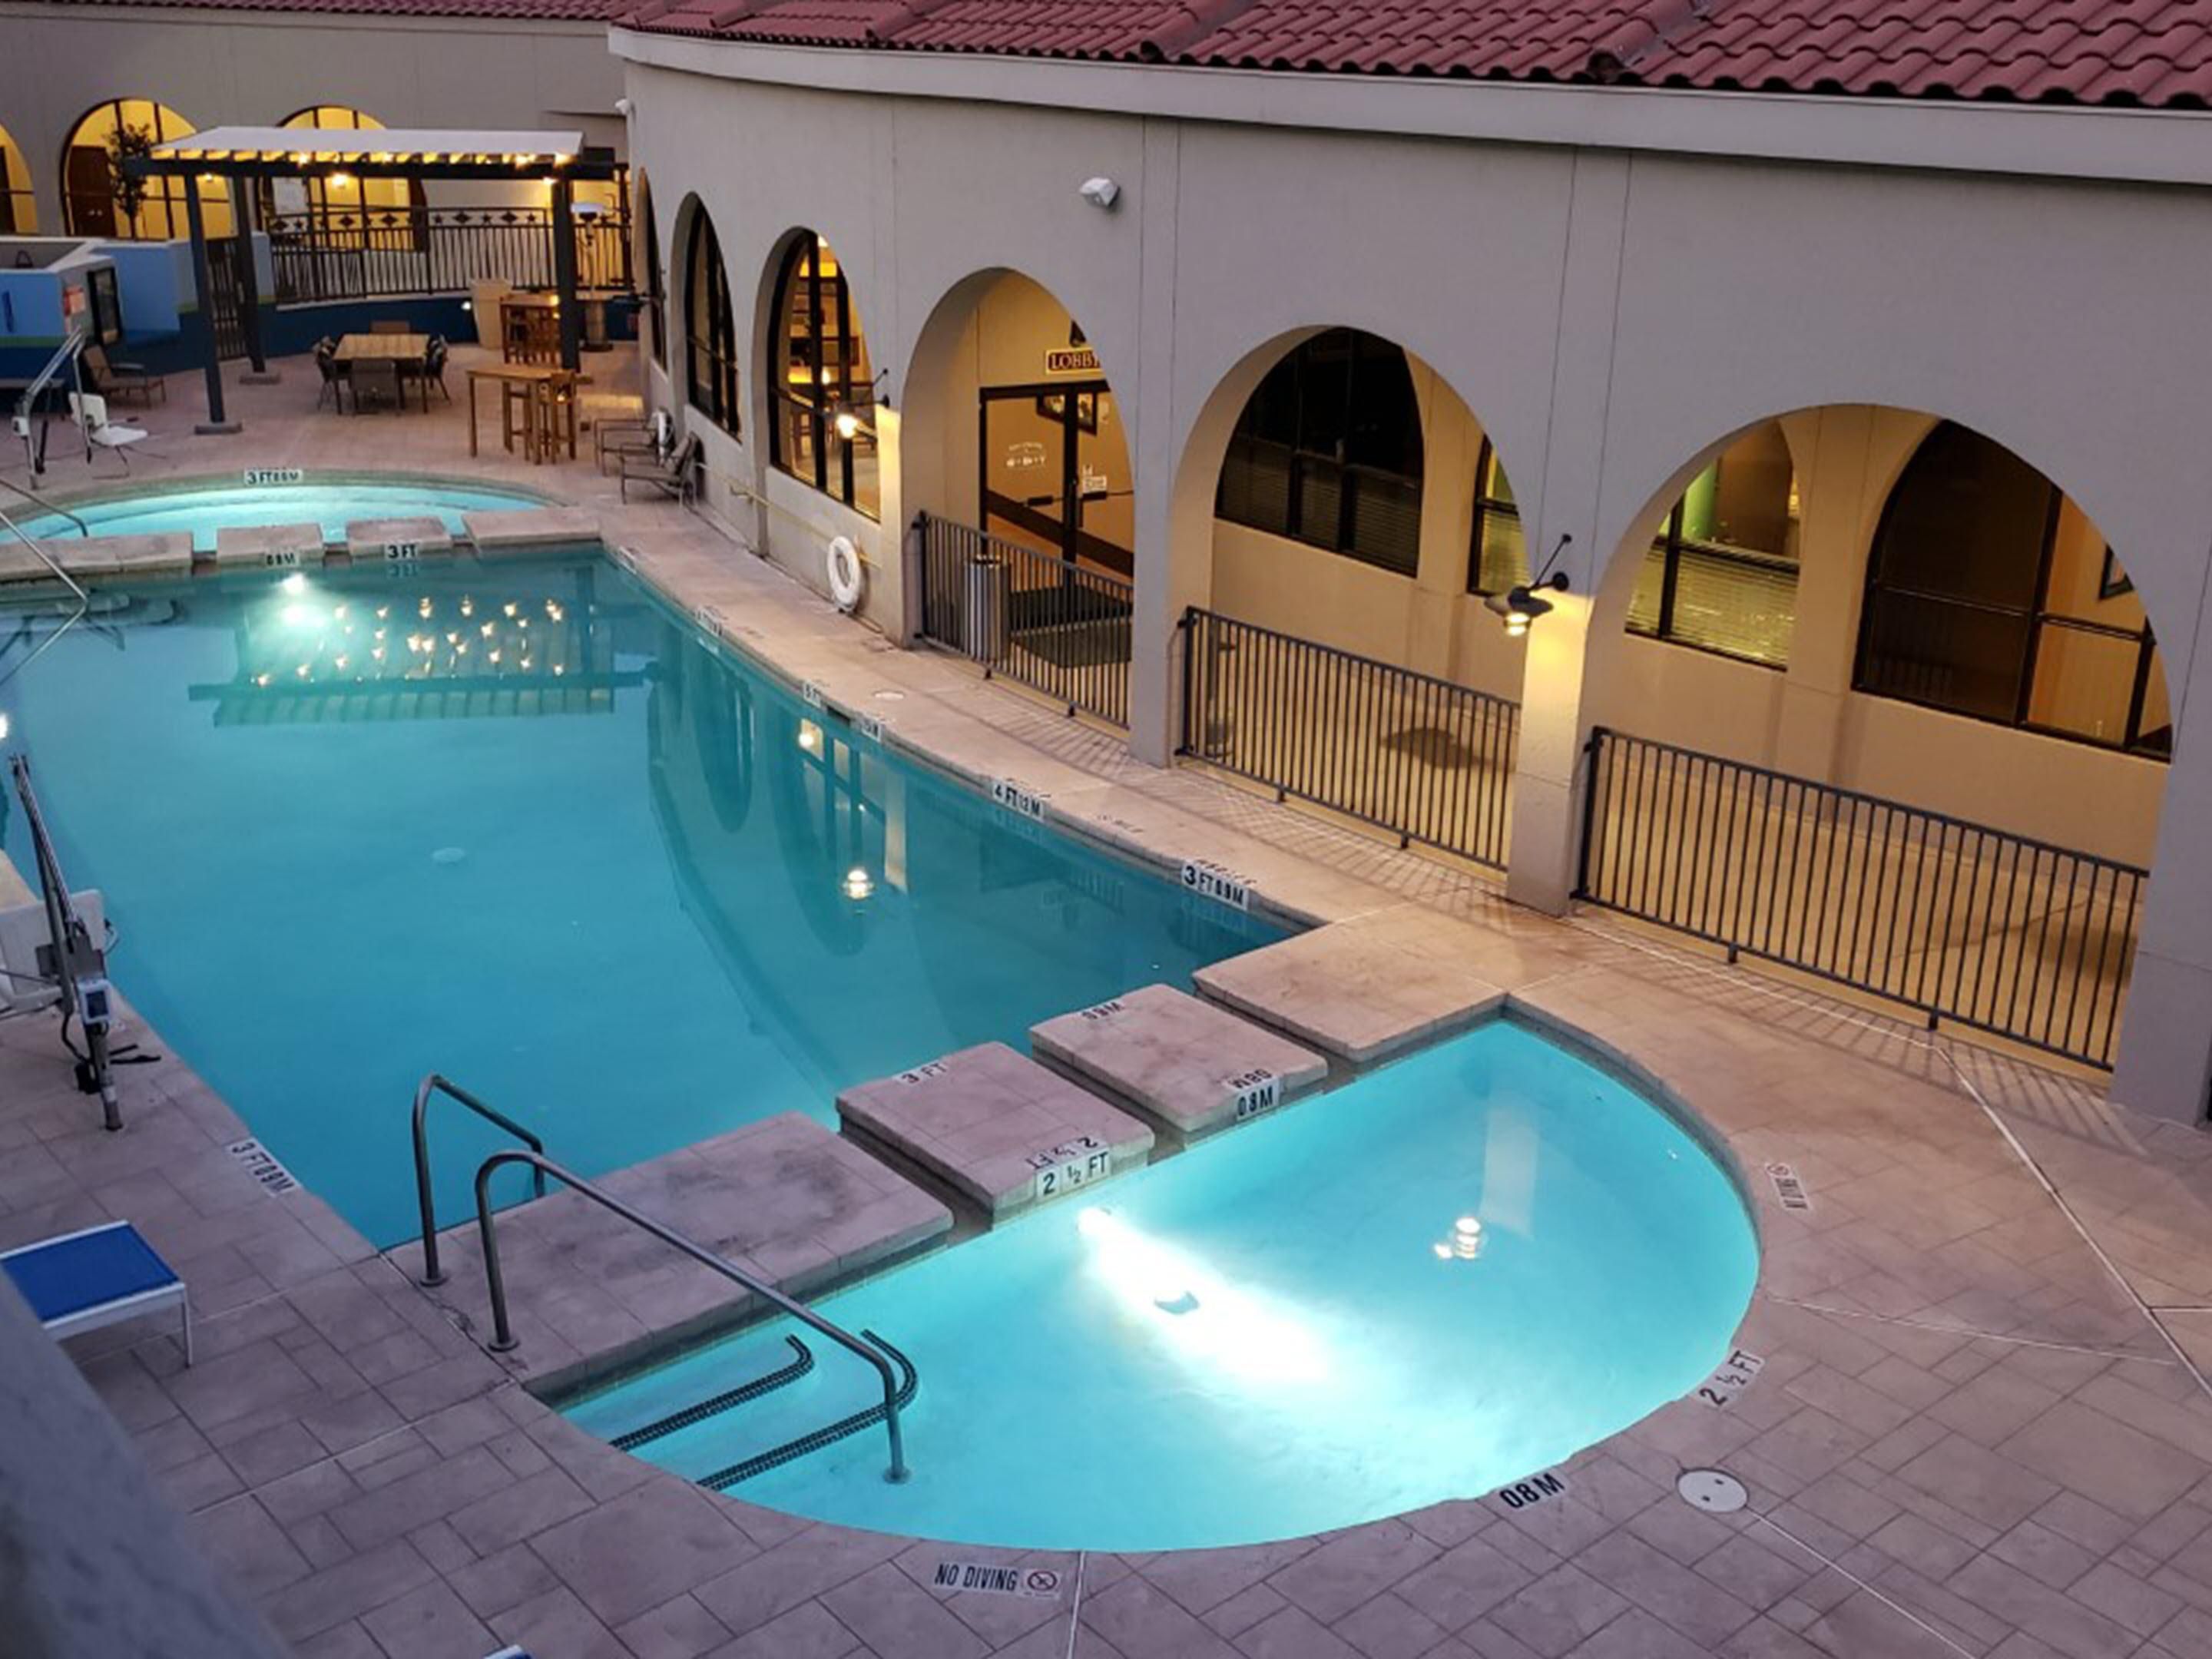 Cool down and take a dip in our refreshing outdoor pool, equipped with comfortable poolside seating. Enjoy some rest and relaxation during your stay.